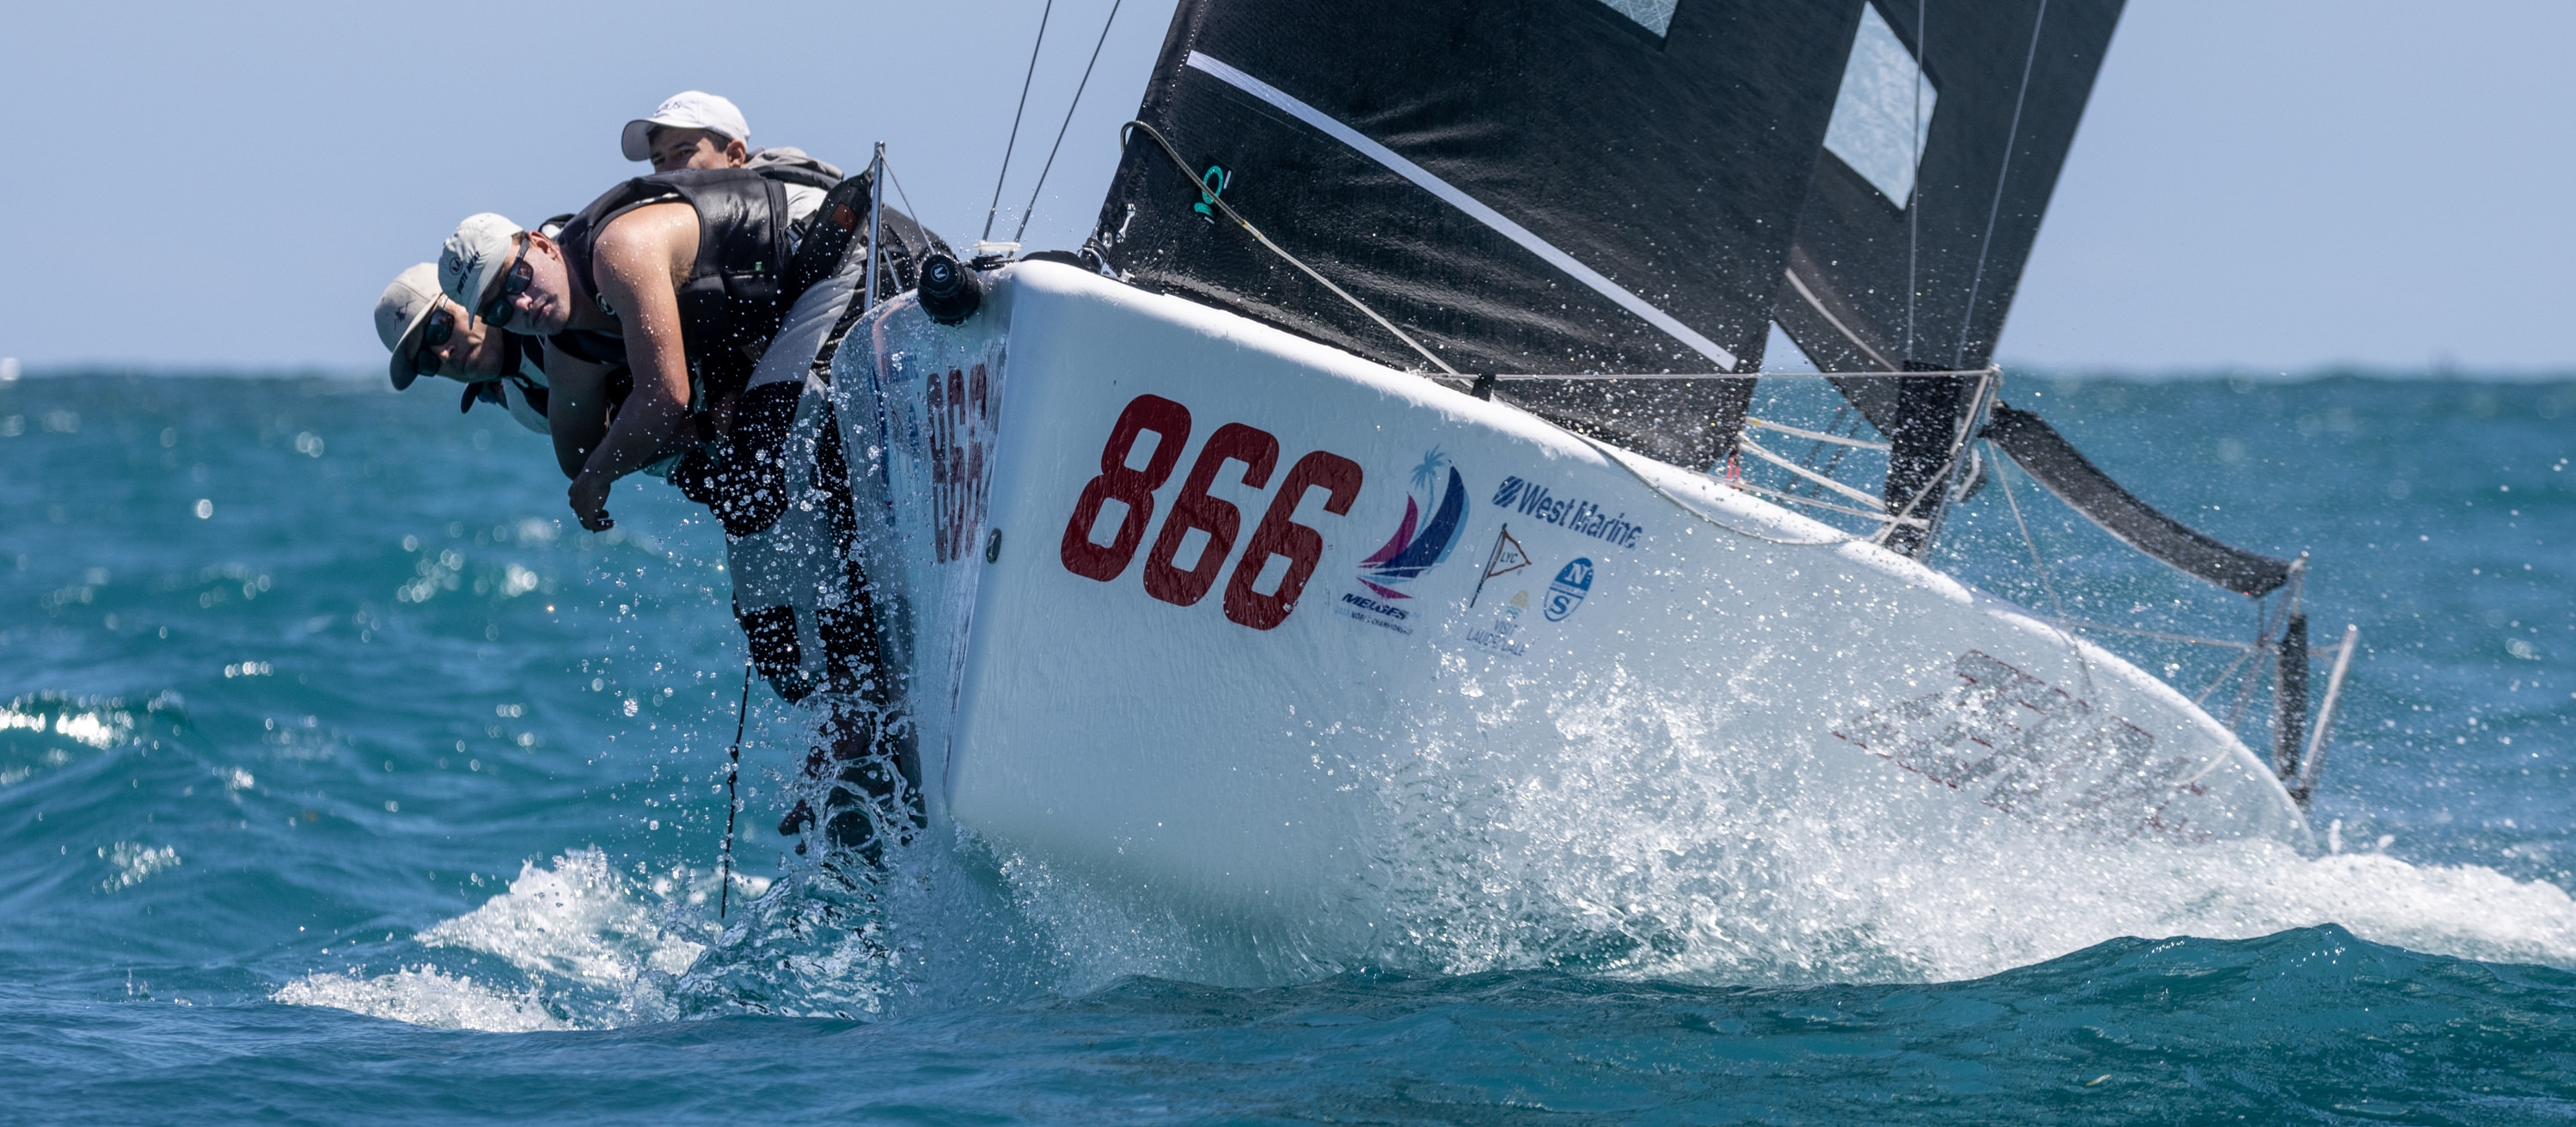 Zenda Express USA866 of Harry Melges IV racing at the Melges 24 Worlds 2022 in Ft Lauderdale, FL, USA